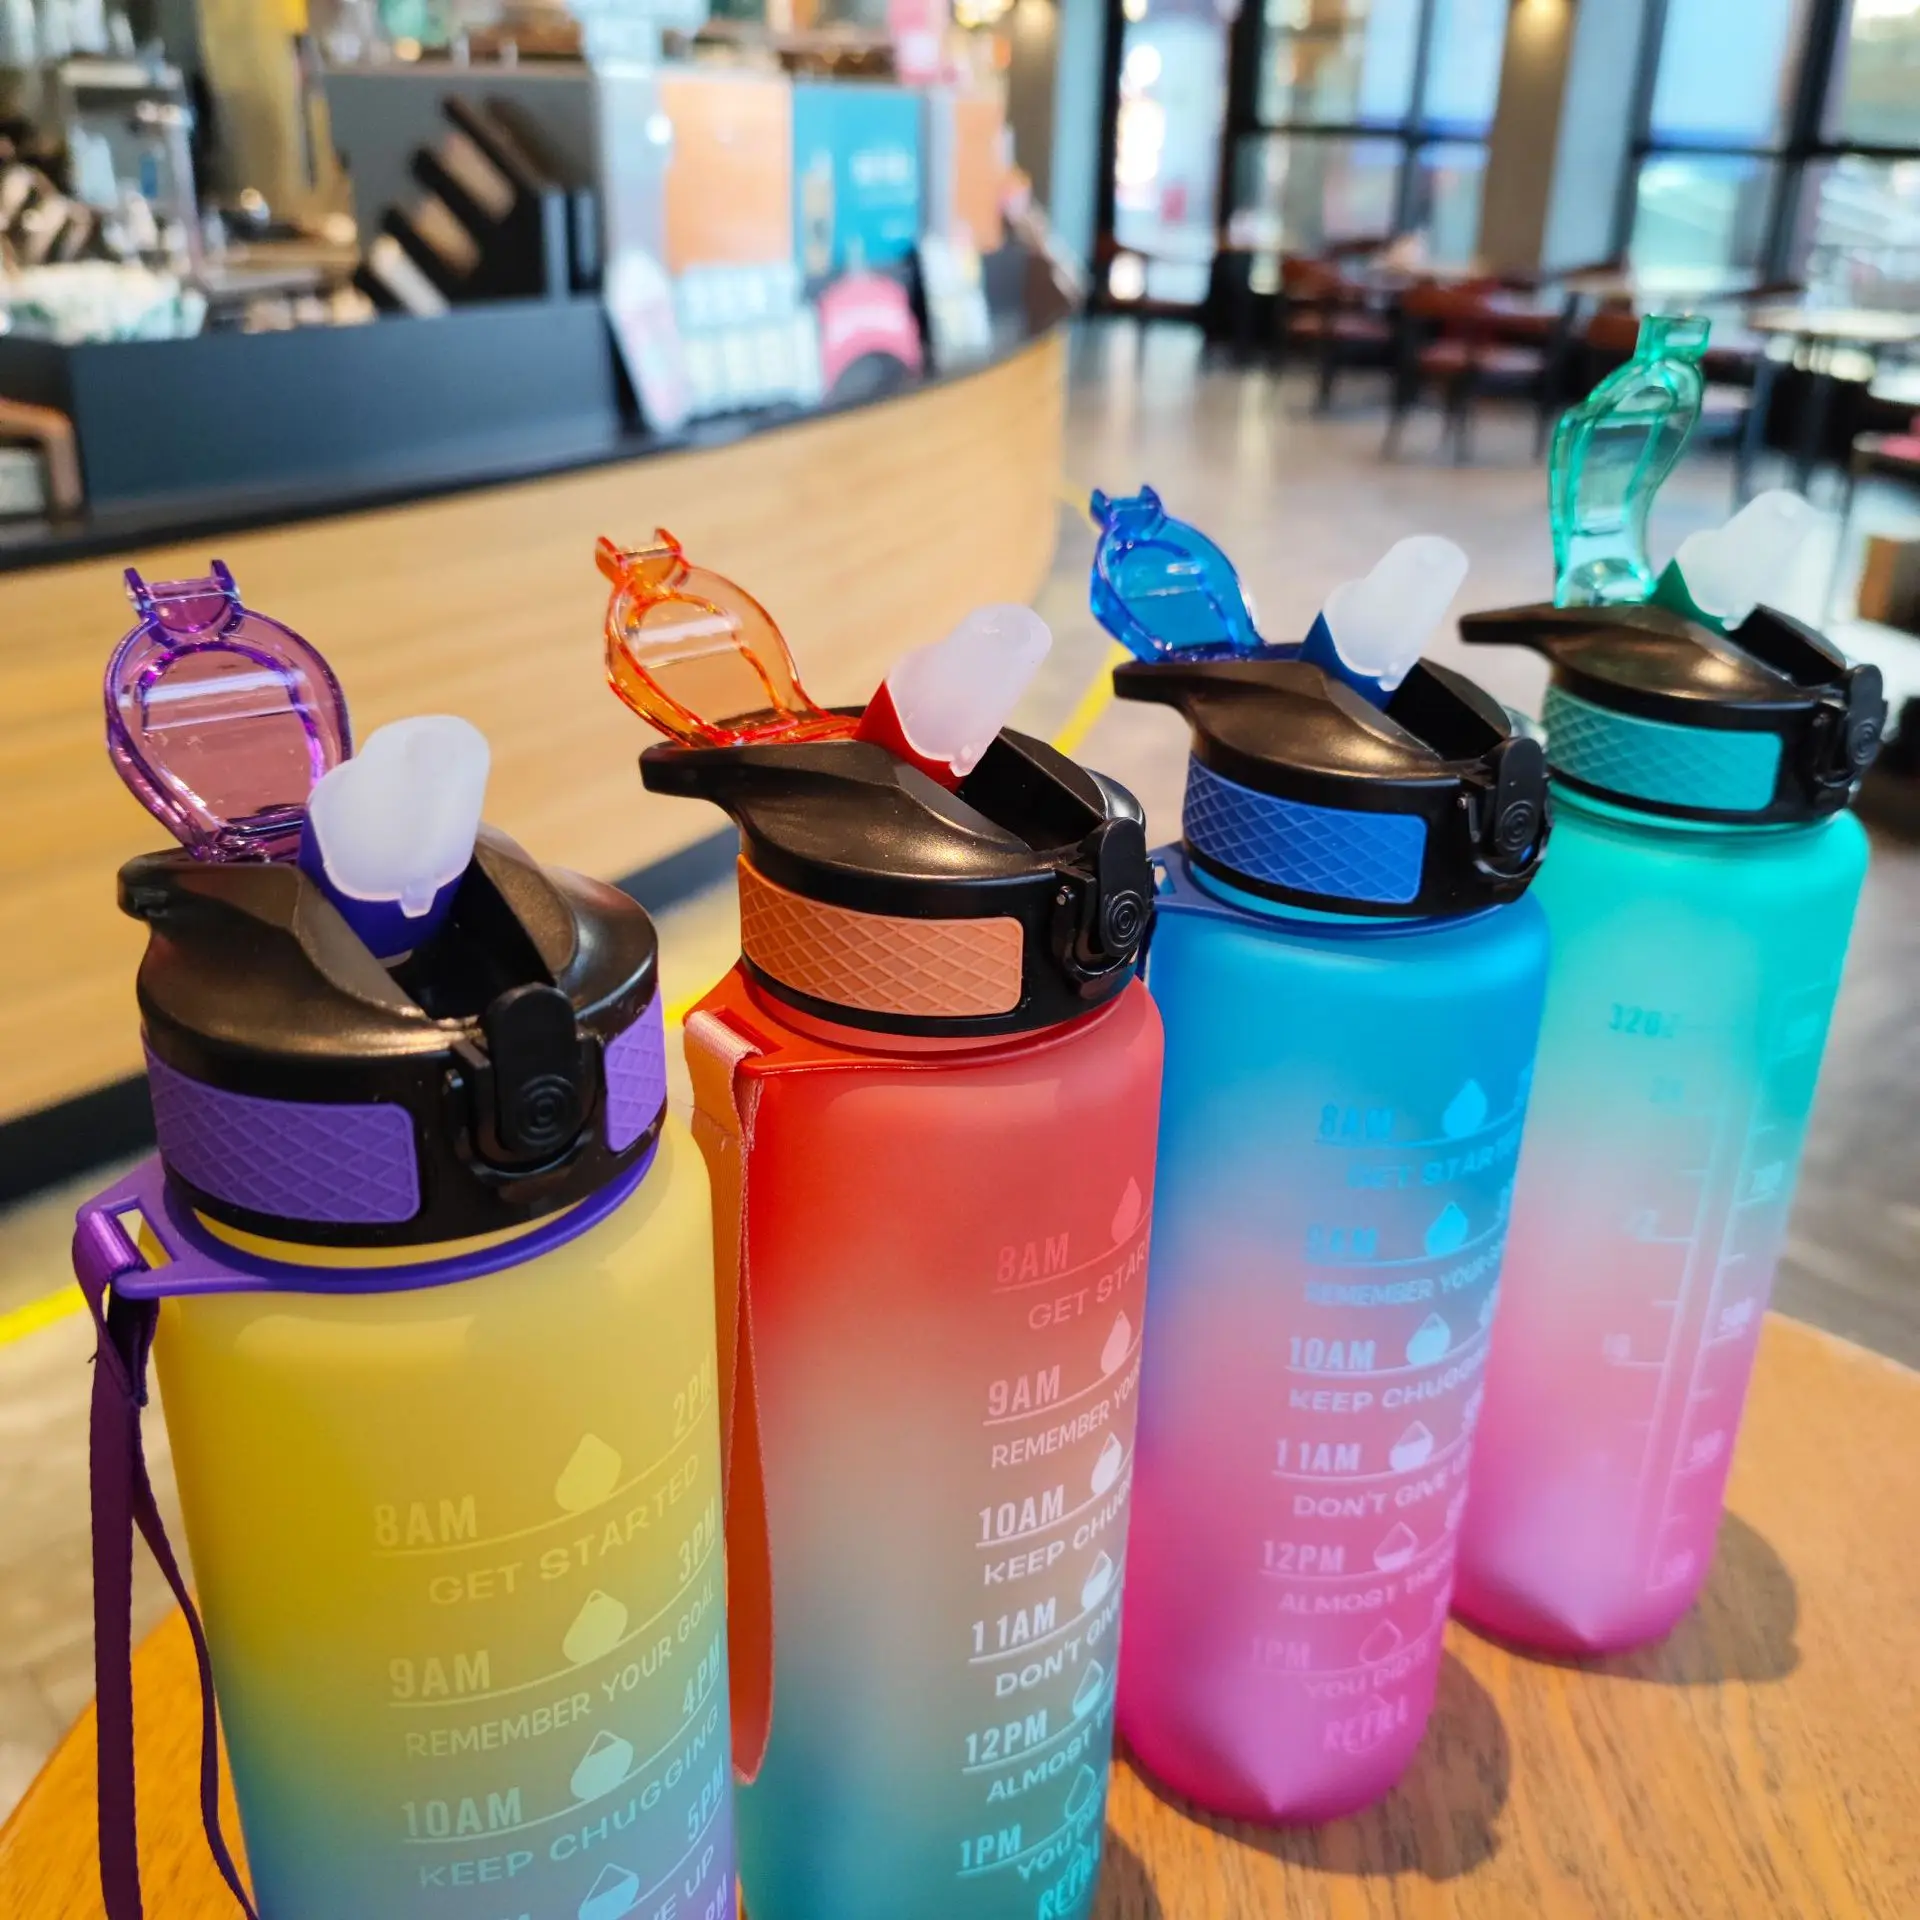 https://ae01.alicdn.com/kf/S6770b1f120914e23b08532885fb81e95m/1000-Ml-32-Oz-Water-Bottle-With-Time-Marker-Sports-Water-Jug-Dazzle-Color-Gradient-Travel.jpg